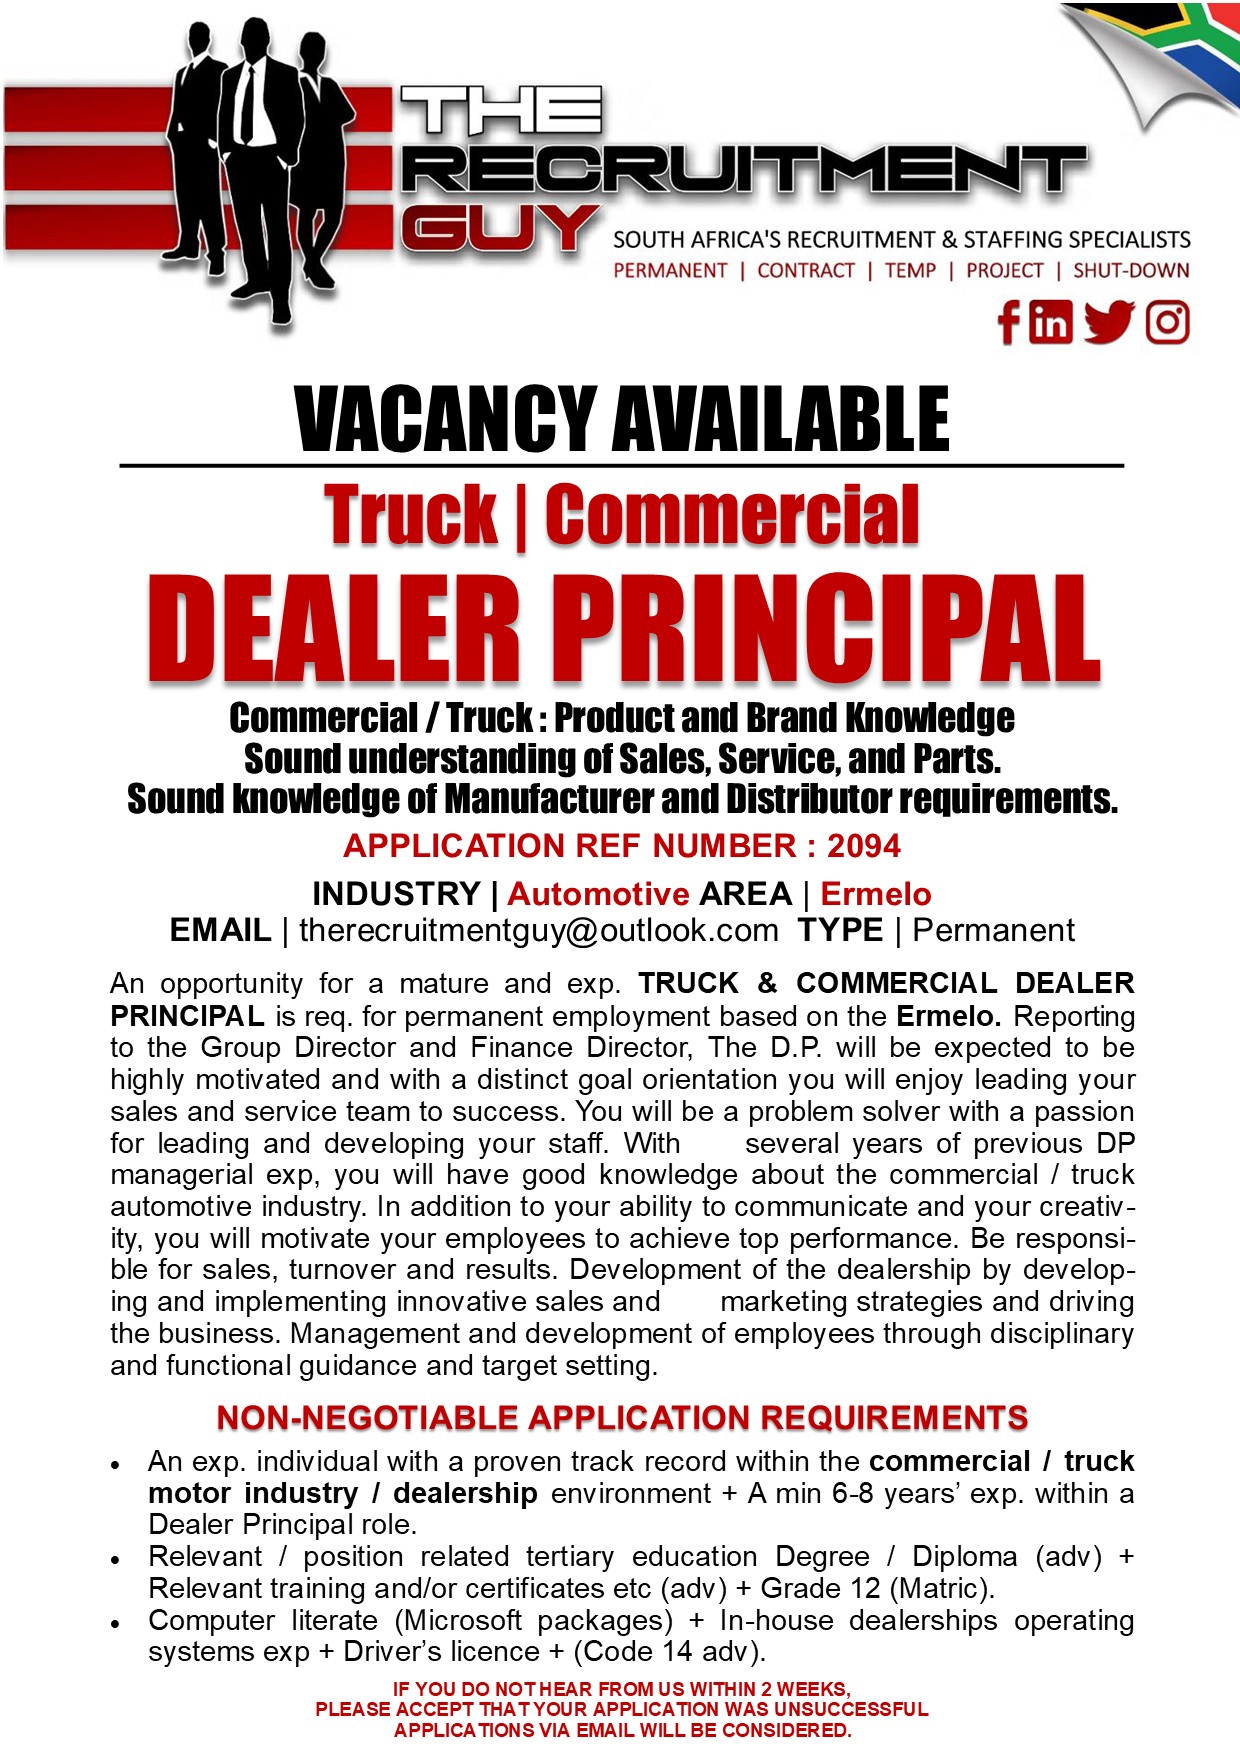 GUY SOUTH AFRICA'S RECRUITMENT &amp; STAFFING SPECIALISTS

PERMANENT | CONTRACT | TEMP | PROJECT | SHUT-DOWN

{ink JG]

VACANCY AVAILABLE
Truck | Commercial

DEALER PRINCIPAL

Commercial / Truck : Product and Brand Knowledge
Sound understanding of Sales, Service, and Parts.
Sound knowledge of Manufacturer and Distributor requirements.
APPLICATION REF NUMBER : 2094

INDUSTRY | Automotive AREA | Ermelo
EMAIL | therecruitmentguy@outlook.com TYPE | Permanent

An opportunity for a mature and exp. TRUCK &amp; COMMERCIAL DEALER
PRINCIPAL is req. for permanent employment based on the Ermelo. Reporting
to the Group Director and Finance Director, The D.P. will be expected to be
highly motivated and with a distinct goal orientation you will enjoy leading your
sales and service team to success. You will be a problem solver with a passion
for leading and developing your staff. With several years of previous DP
managerial exp, you will have good knowledge about the commercial / truck
automotive industry. In addition to your ability to communicate and your creativ-
ity, you will motivate your employees to achieve top performance. Be responsi-
ble for sales, turnover and results. Development of the dealership by develop-
ing and implementing innovative sales and marketing strategies and driving
the business. Management and development of employees through disciplinary
and functional guidance and target setting

NON-NEGOTIABLE APPLICATION REQUIREMENTS

« An exp. individual with a proven track record within the commercial / truck
motor industry / dealership environment + A min 6-8 years’ exp. within a
Dealer Principal role

+ Relevant / position related tertiary education Degree / Diploma (adv) +
Relevant training and/or certificates etc (adv) + Grade 12 (Matric)

« Computer literate (Microsoft packages) + In-house dealerships operating
systems exp + Driver's licence + (Code 14 adv)

IF YOU DO NOTHEAR FROM US WITHIN 2 WEEKS,
PLEASE ACCEPT THAT YOUR APPLICATION WAS UNSUCCESSFUL
APPLICATIONS VIA EMAIL WILL BE CONSIDERED.